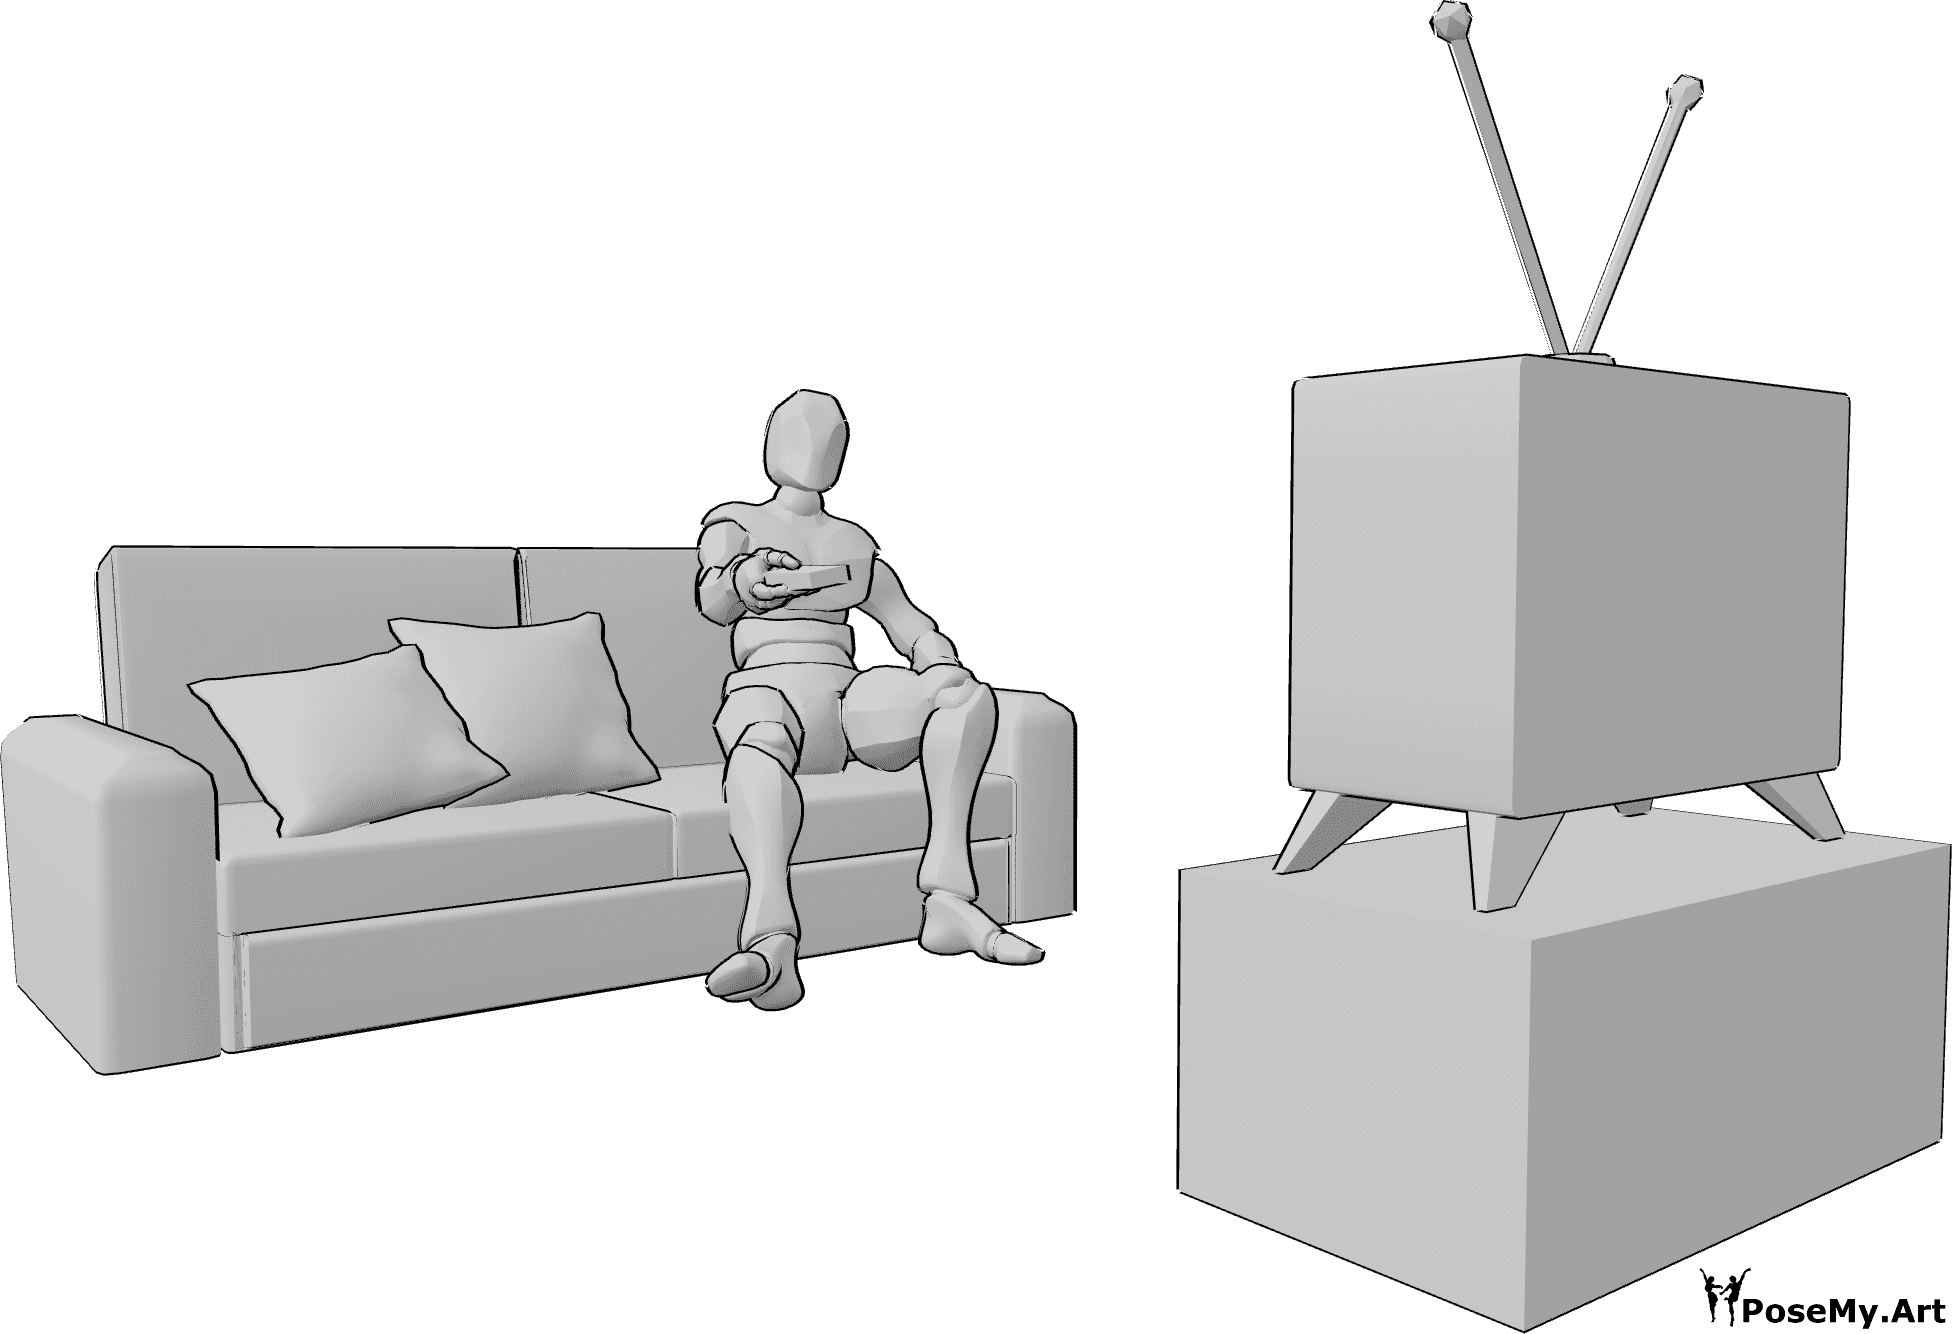 Pose Reference - Changing TV channels pose - Male is sitting on the sofa and changes channels with the remote control